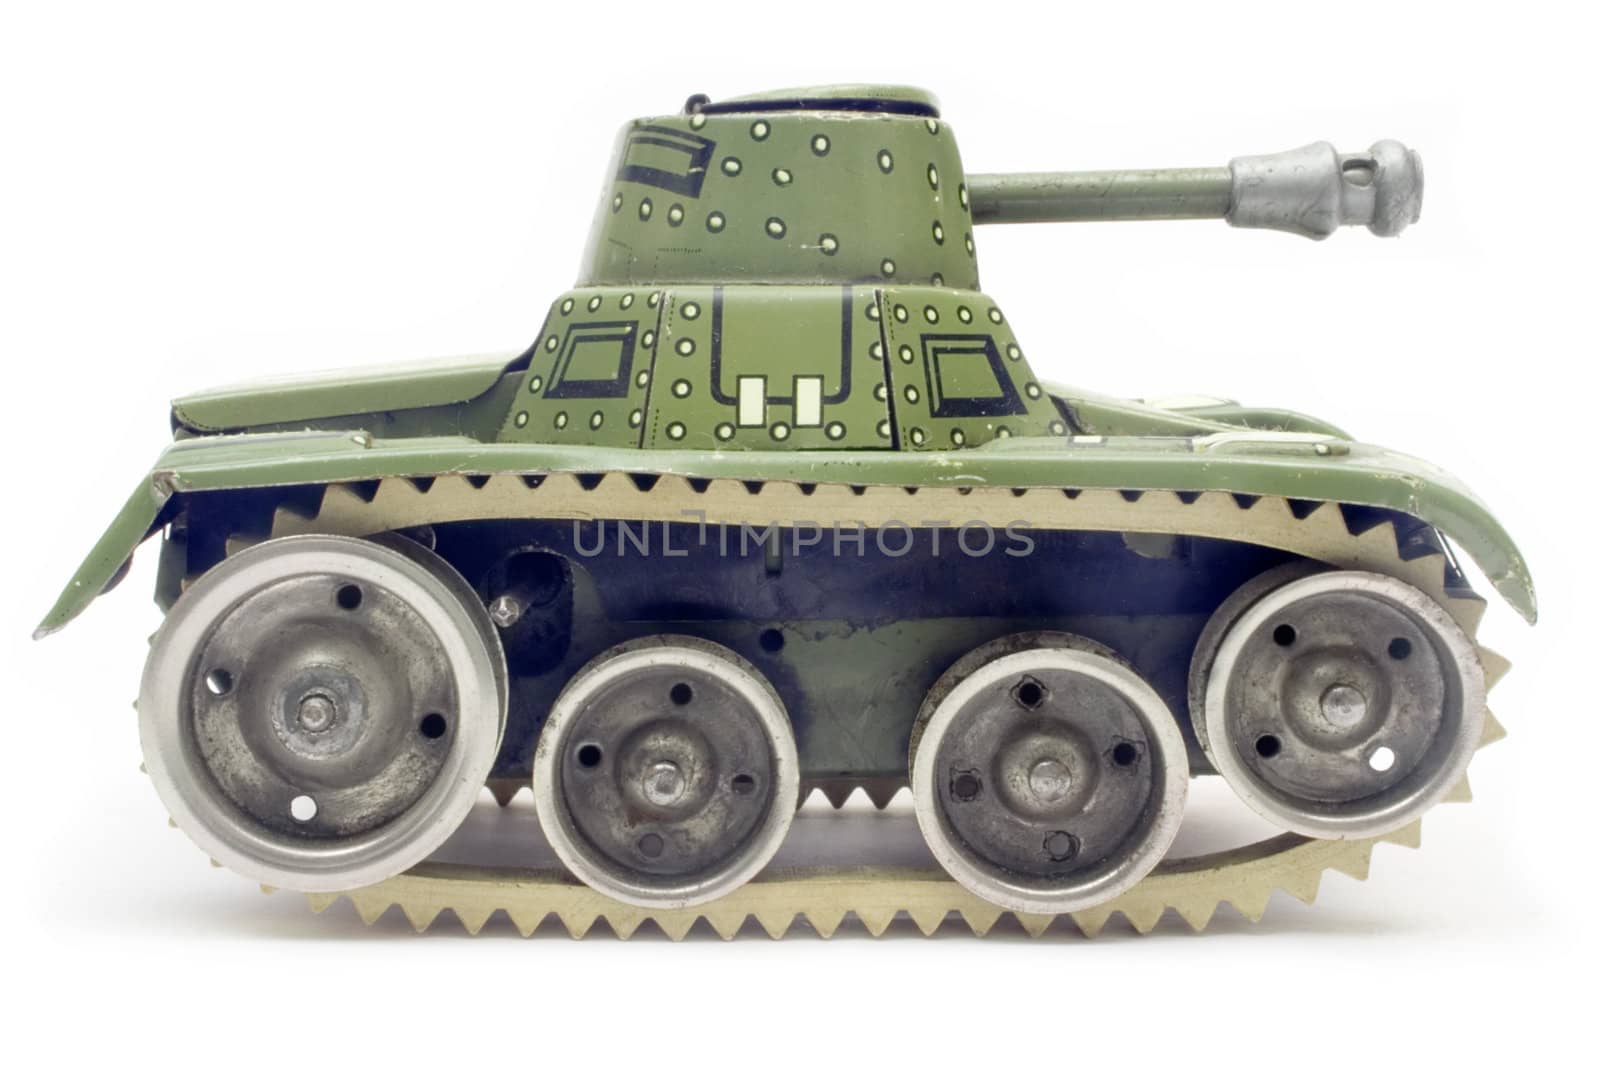 Old Toy Tank Side View by winterling